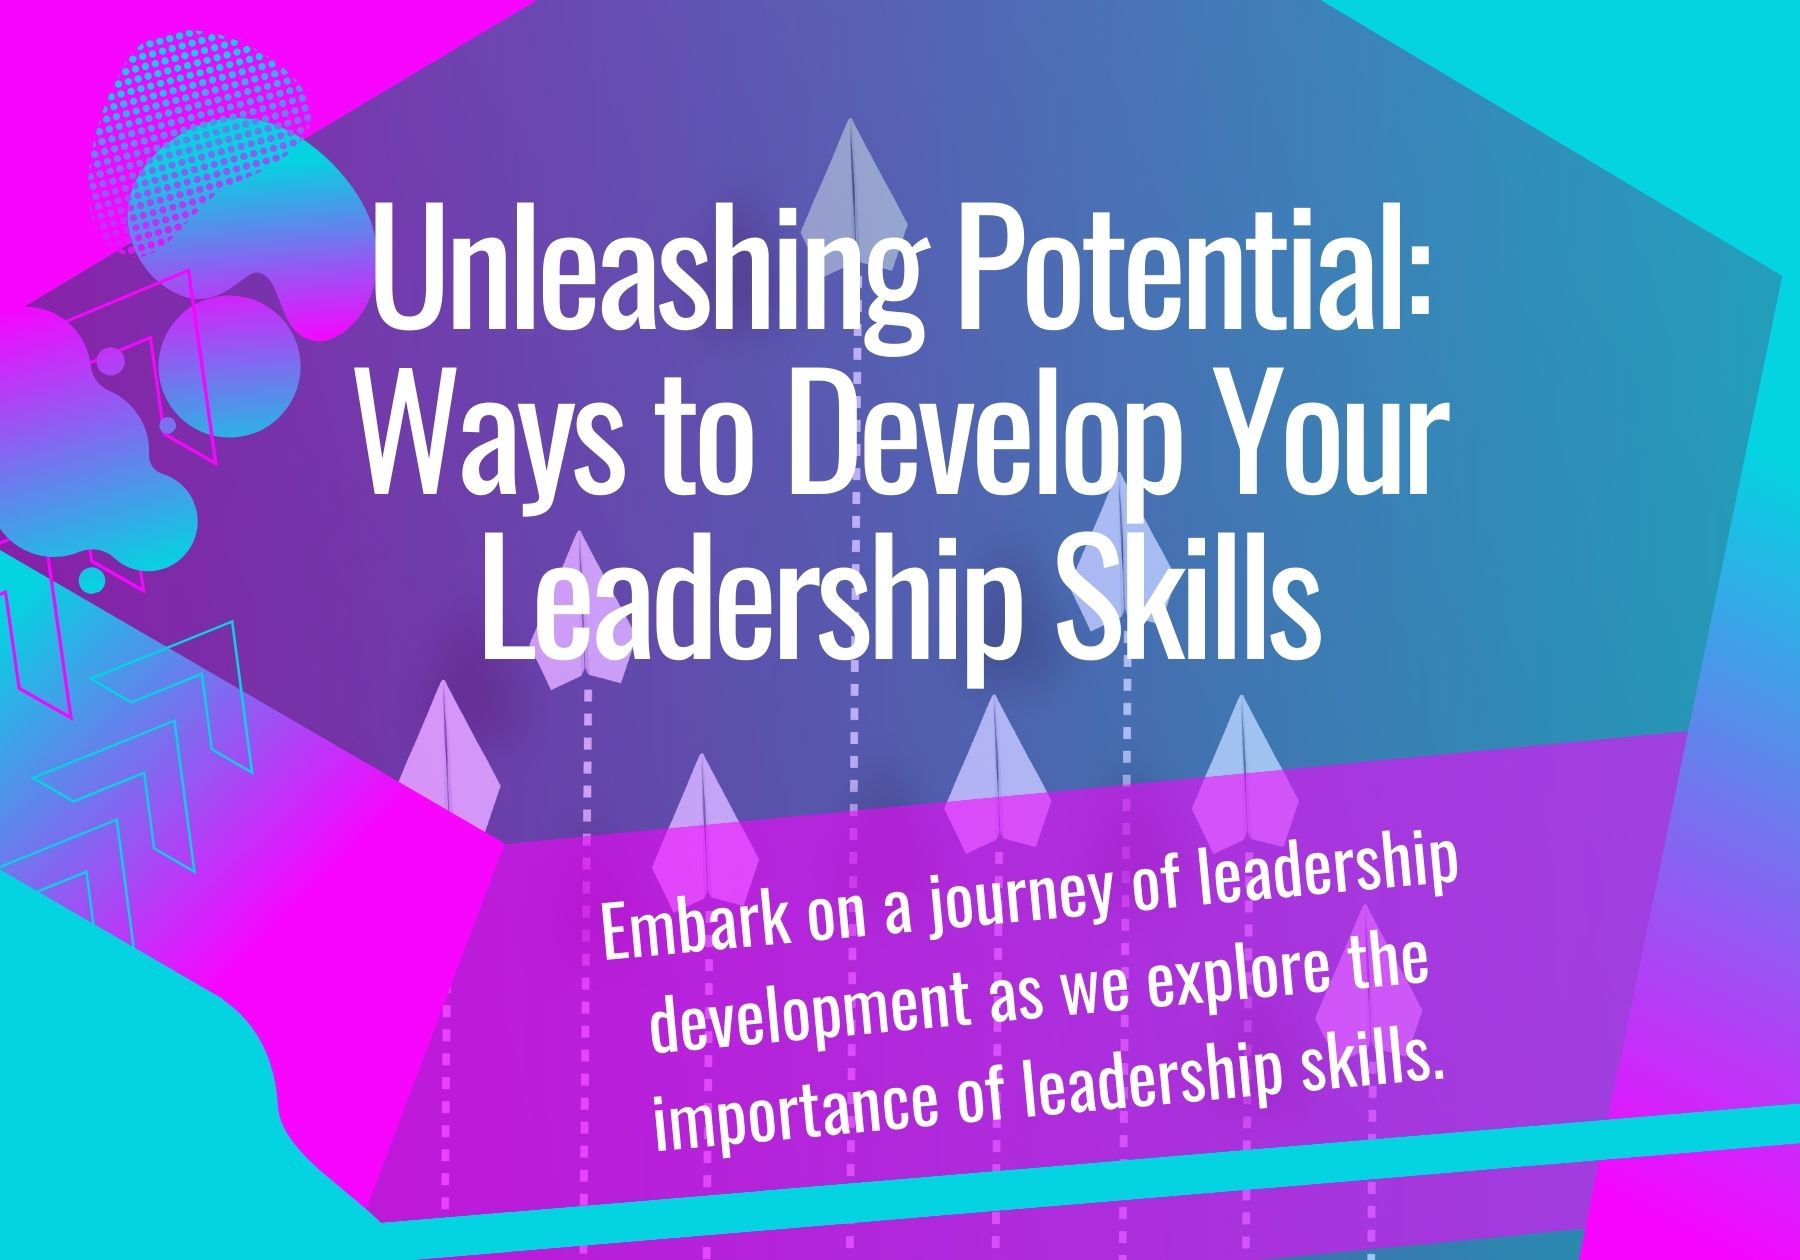 Unleashing Potential: Ways to Develop Your Leadership Skills